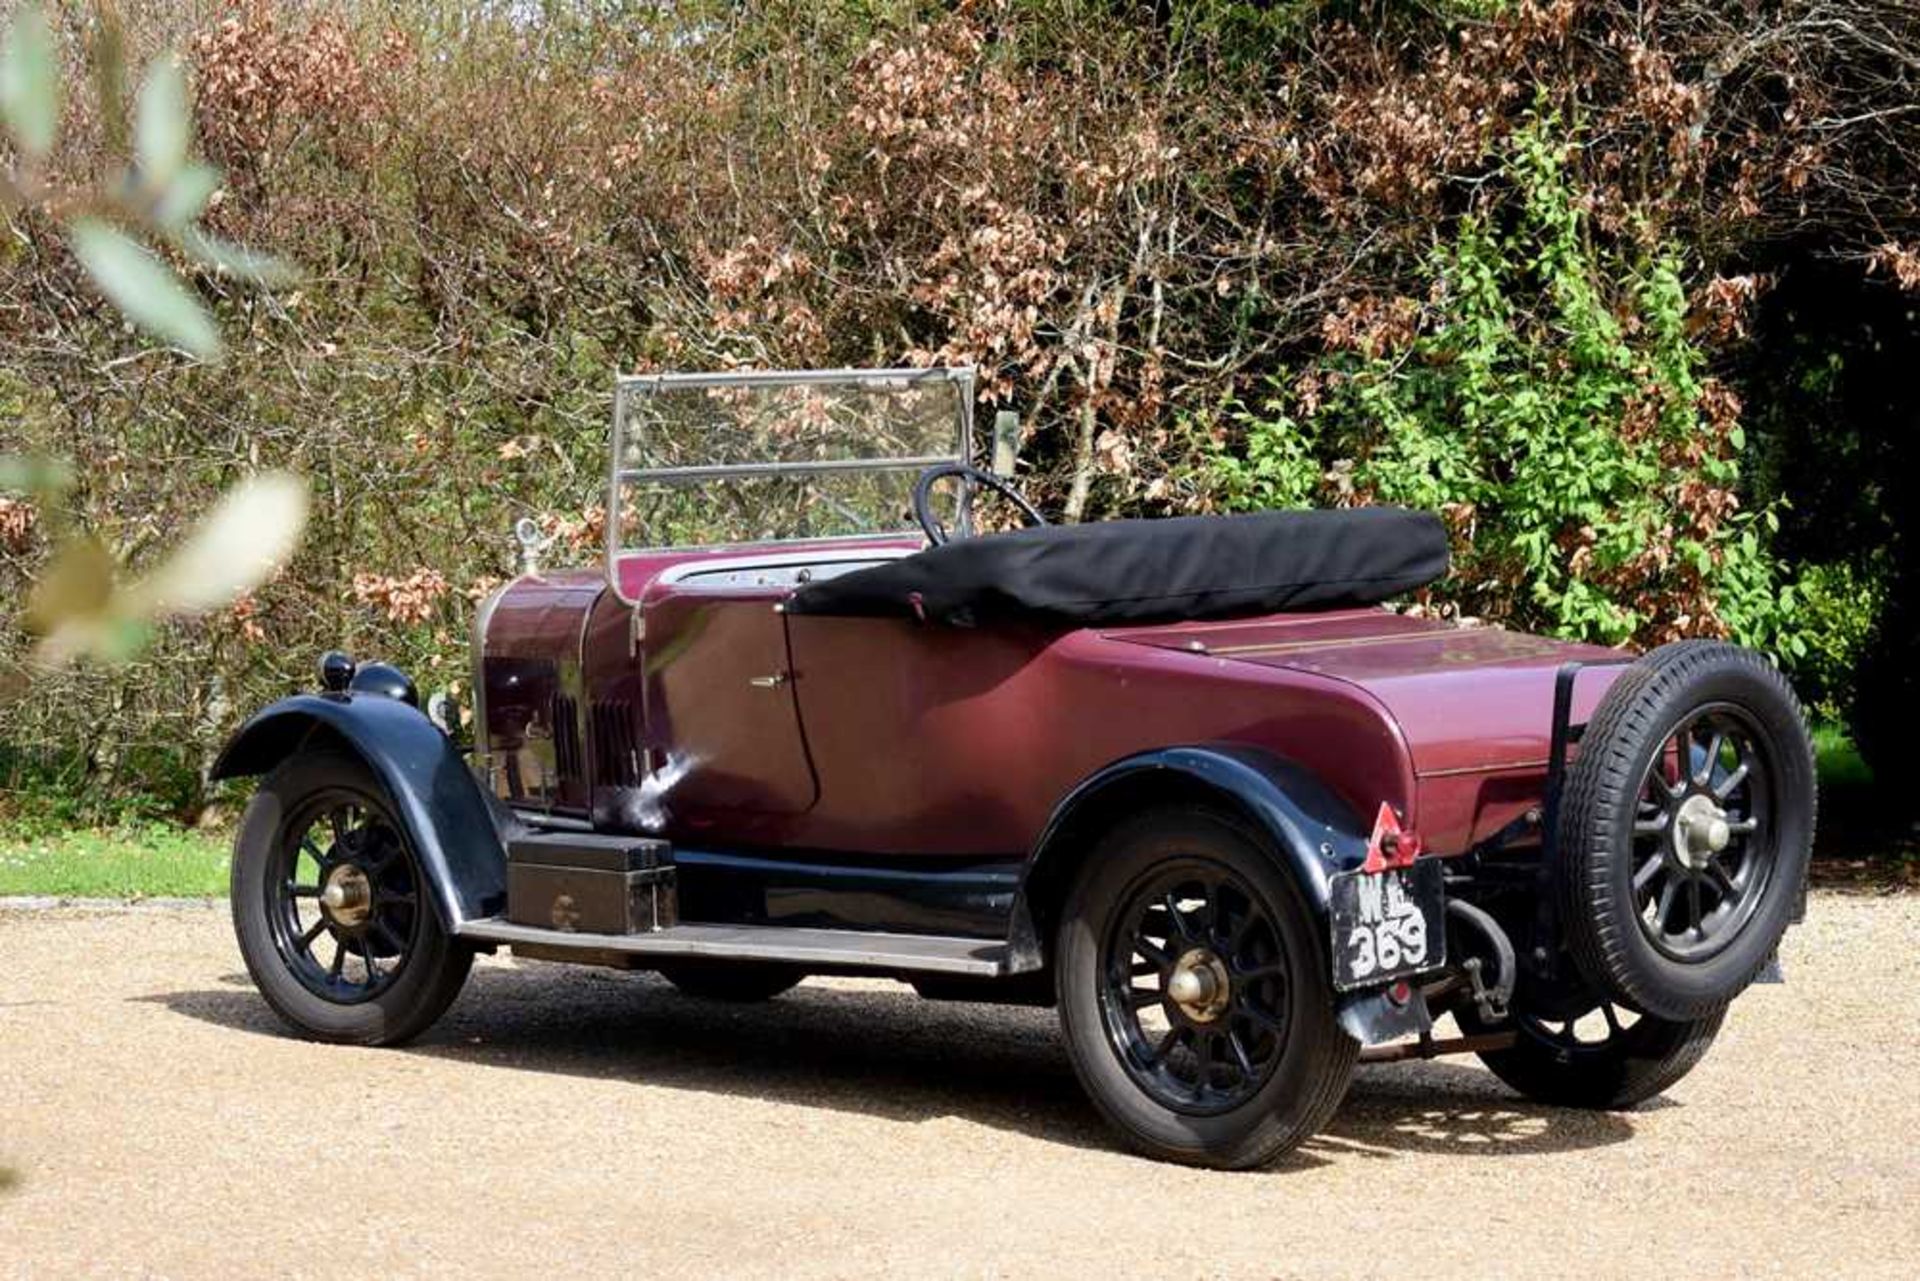 1926 Morris Oxford 'Bullnose' 2-Seat Tourer with Dickey - Image 19 of 99